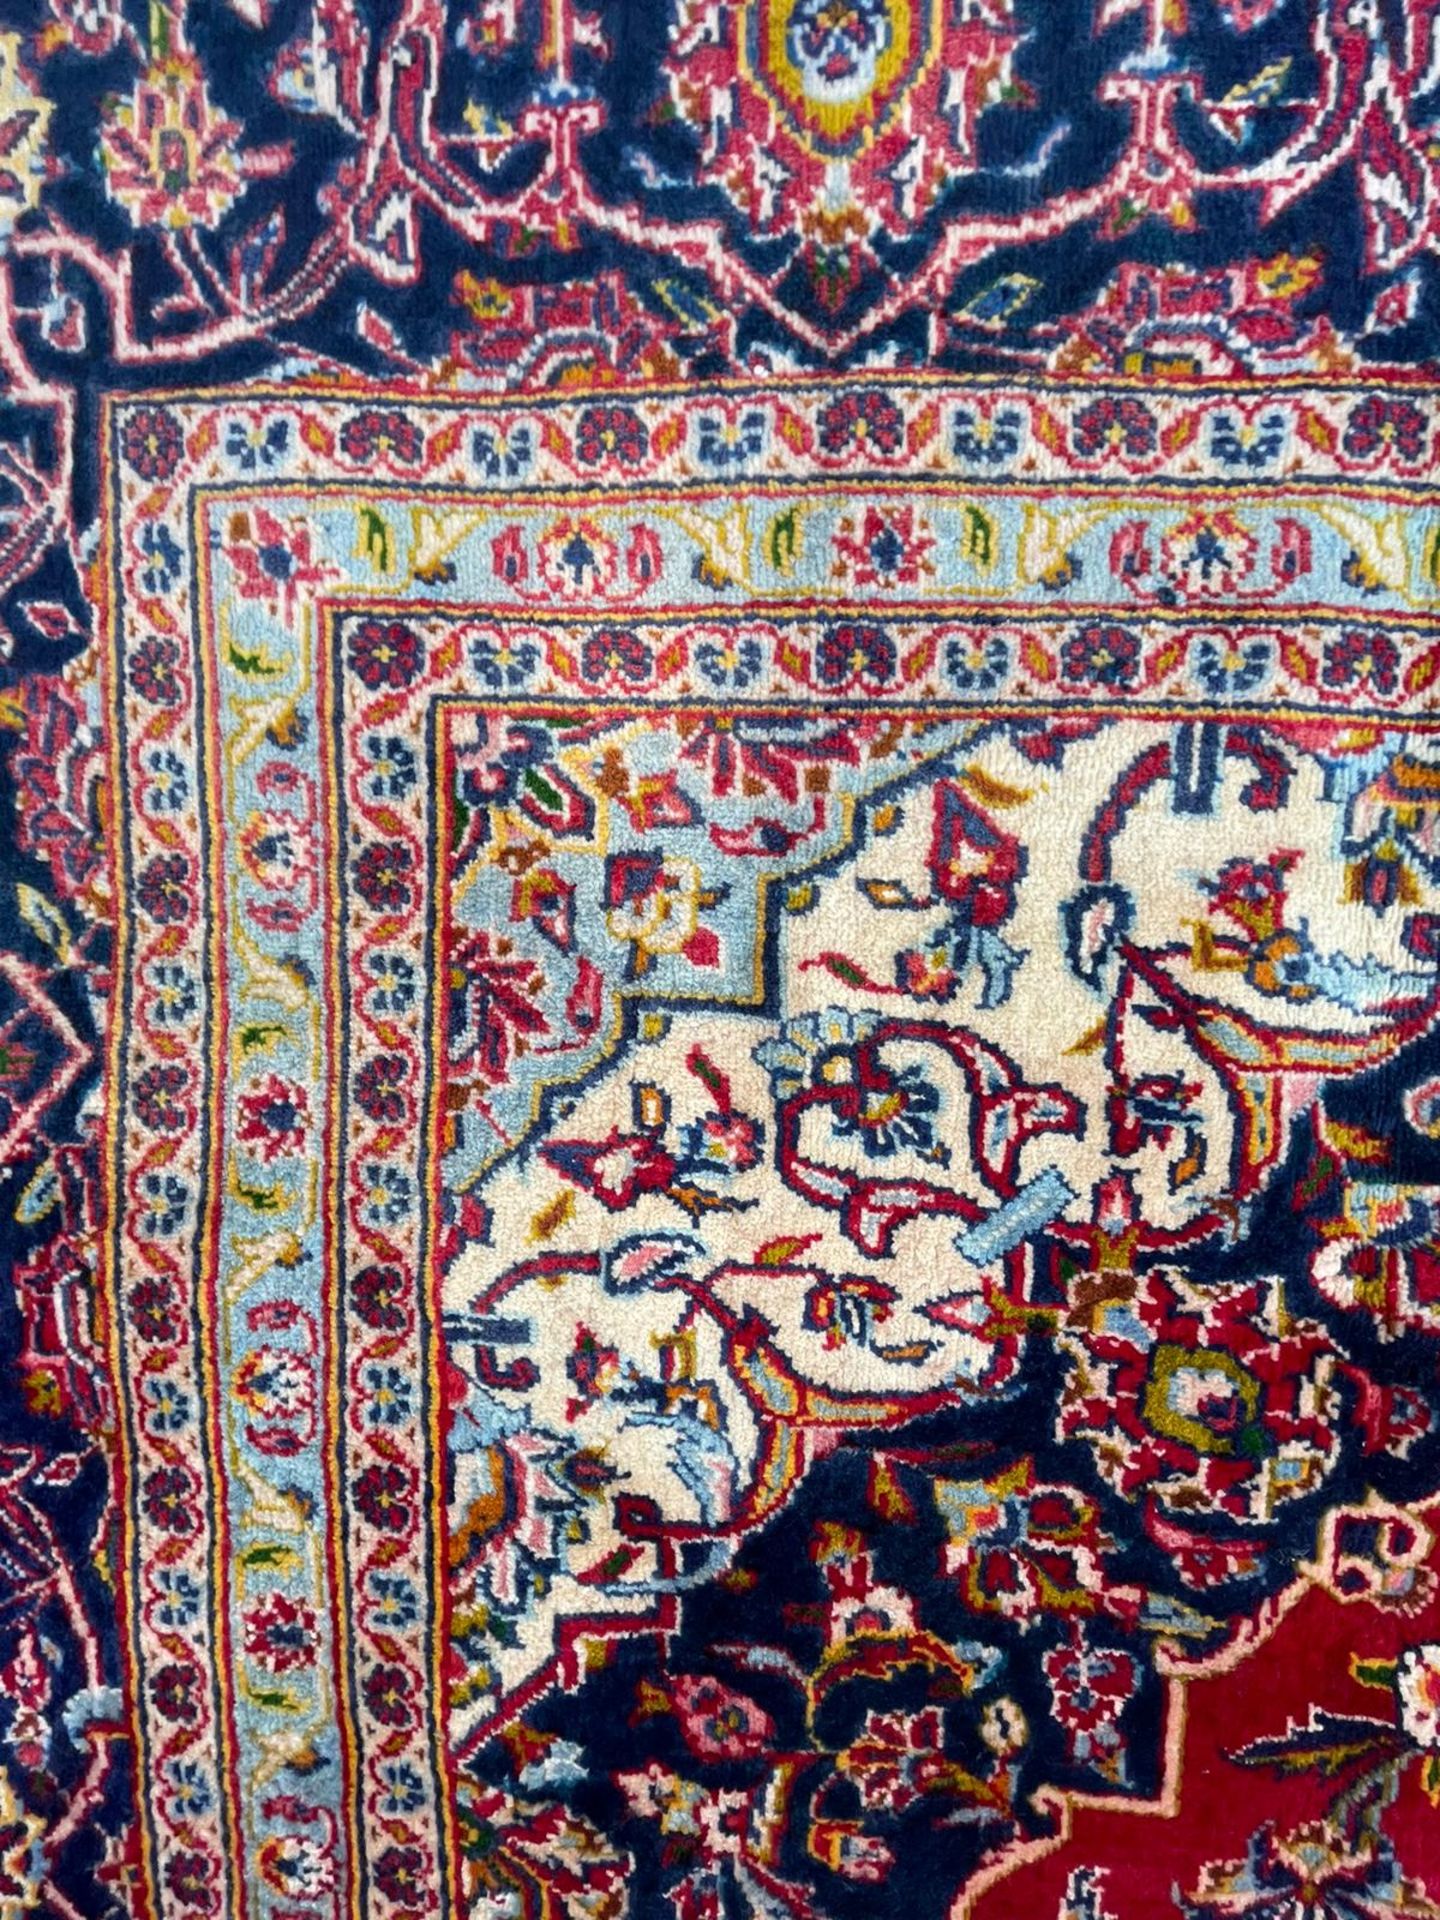 EARLY 20TH CENTURY CENTRAL PERSIAN KASHAN FLOOR CARPET RUG - Image 3 of 6